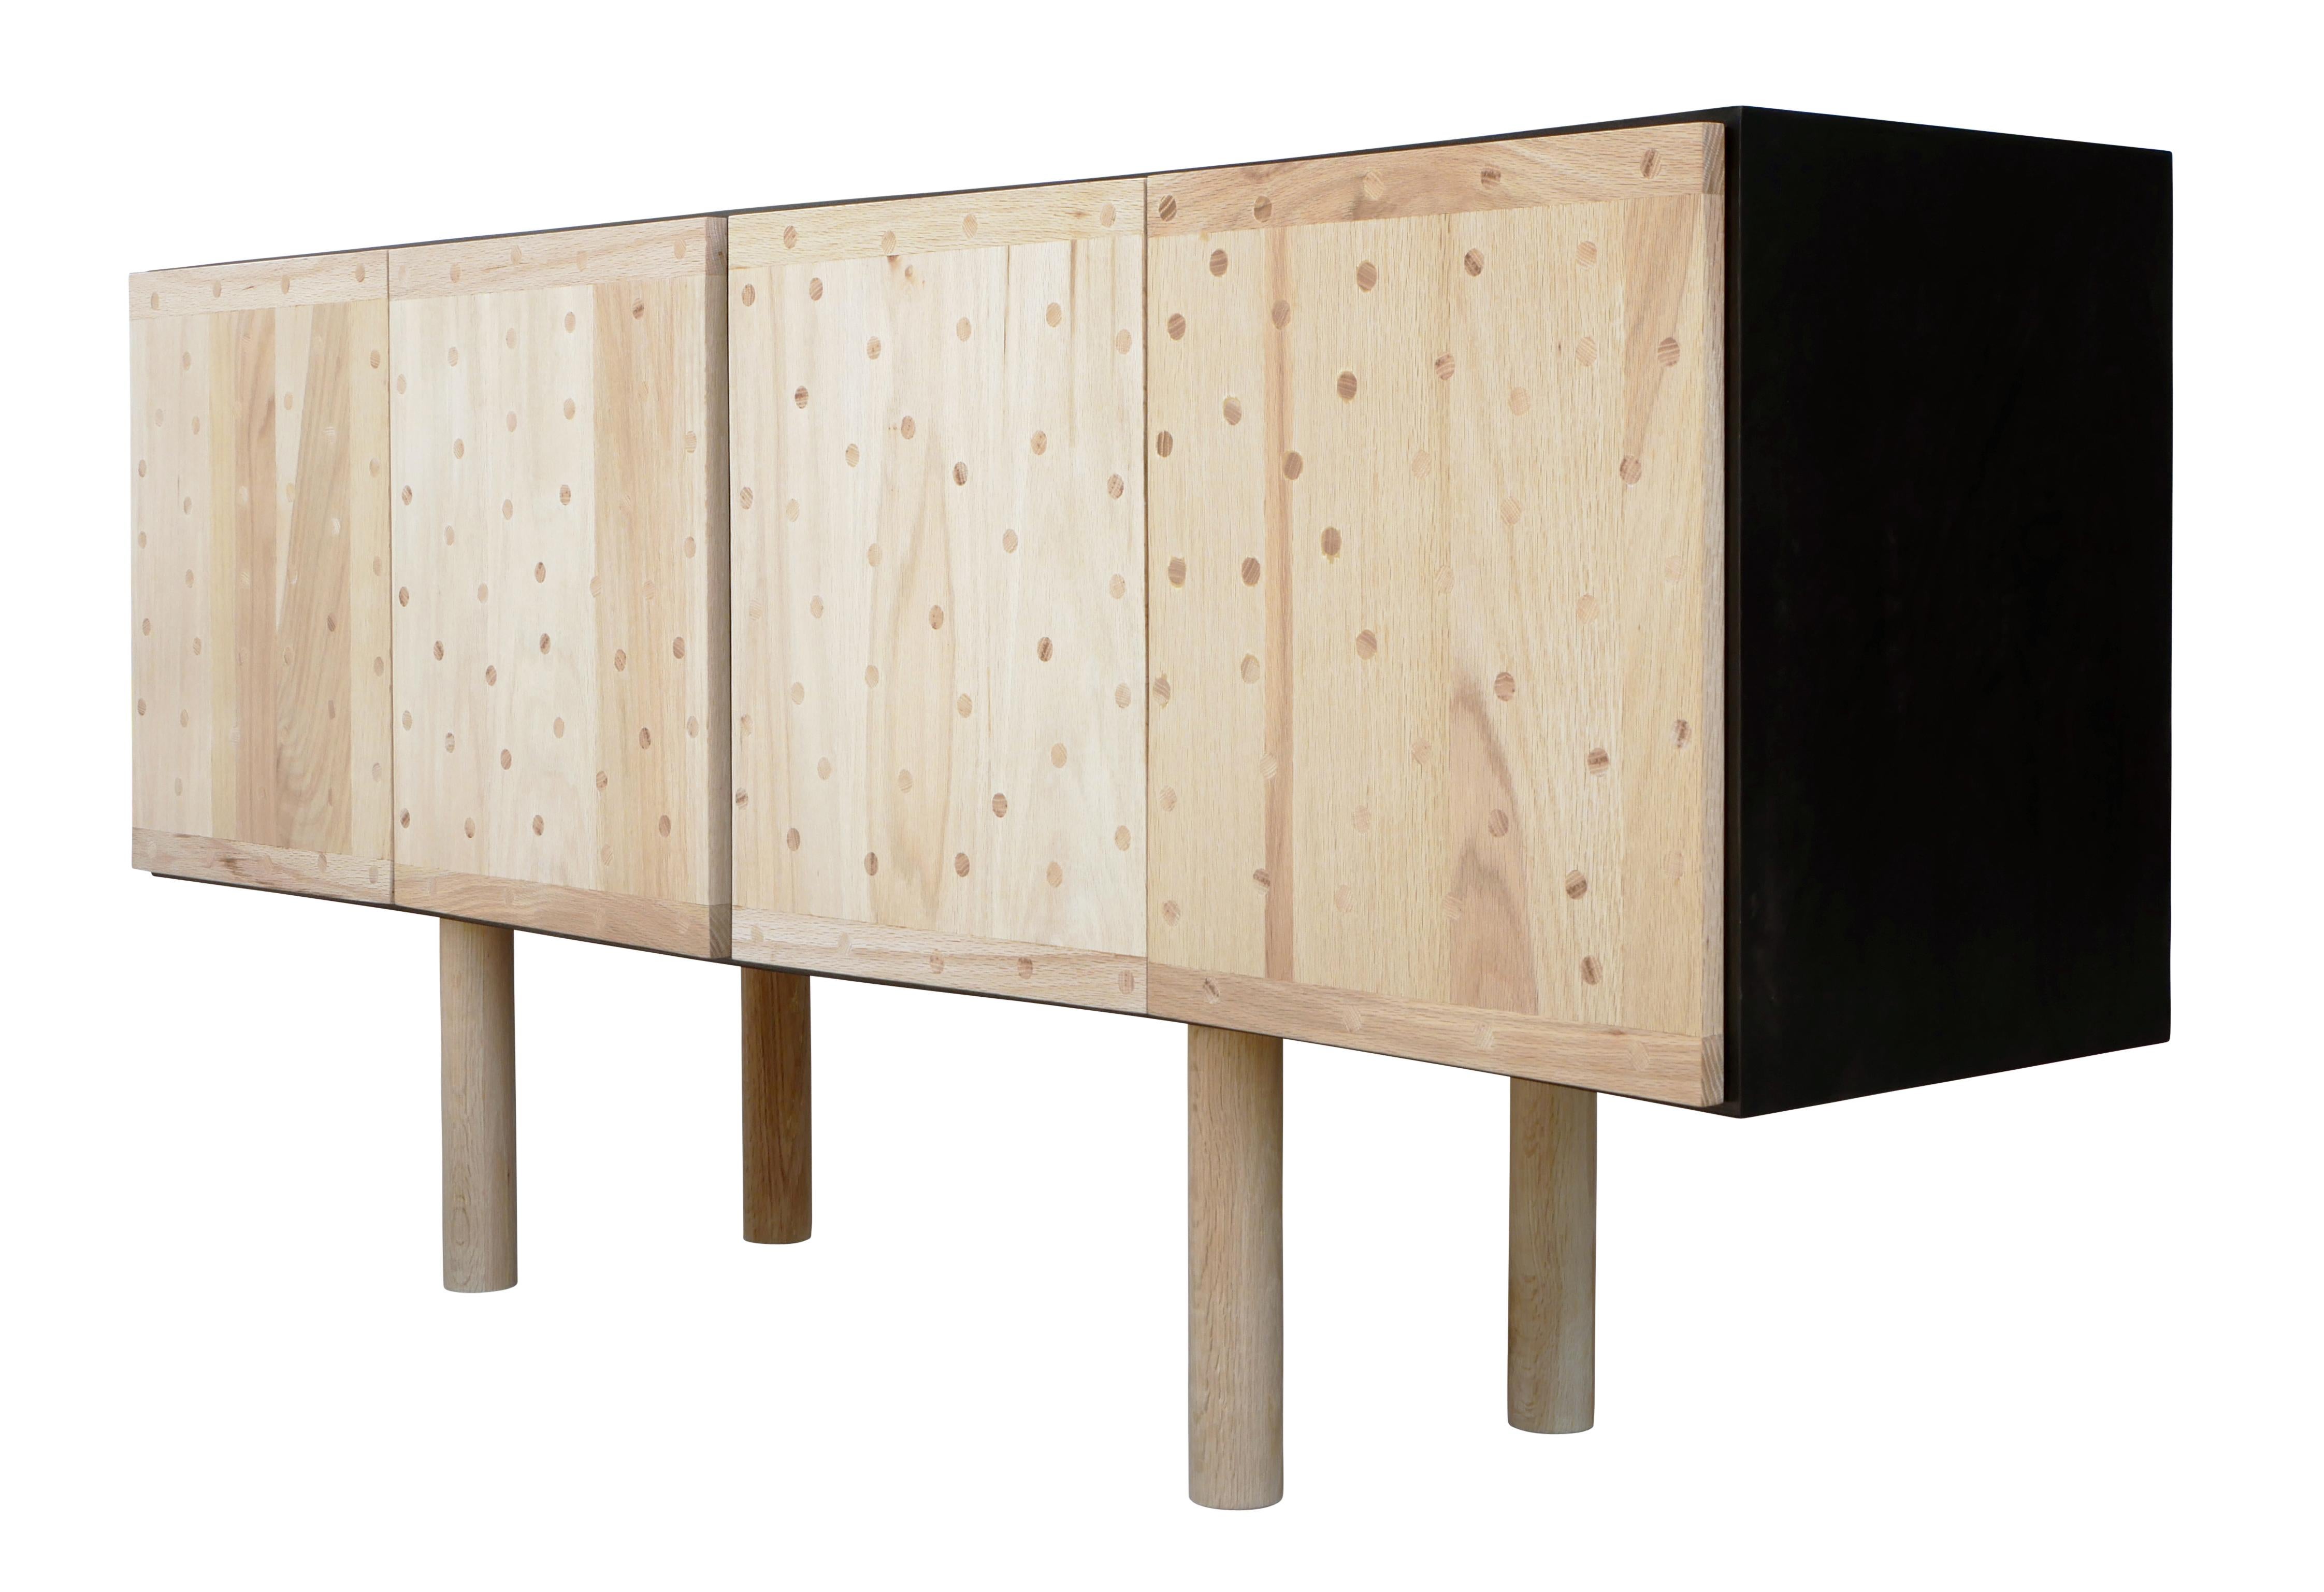 Custom Reeves Art + Design natural and black postmodern with cylindrical legs. The sideboard doors feature circular wood inlays that create interest and is paired with the sleek and smooth legs, balancing the overall soft and sharp elements of this